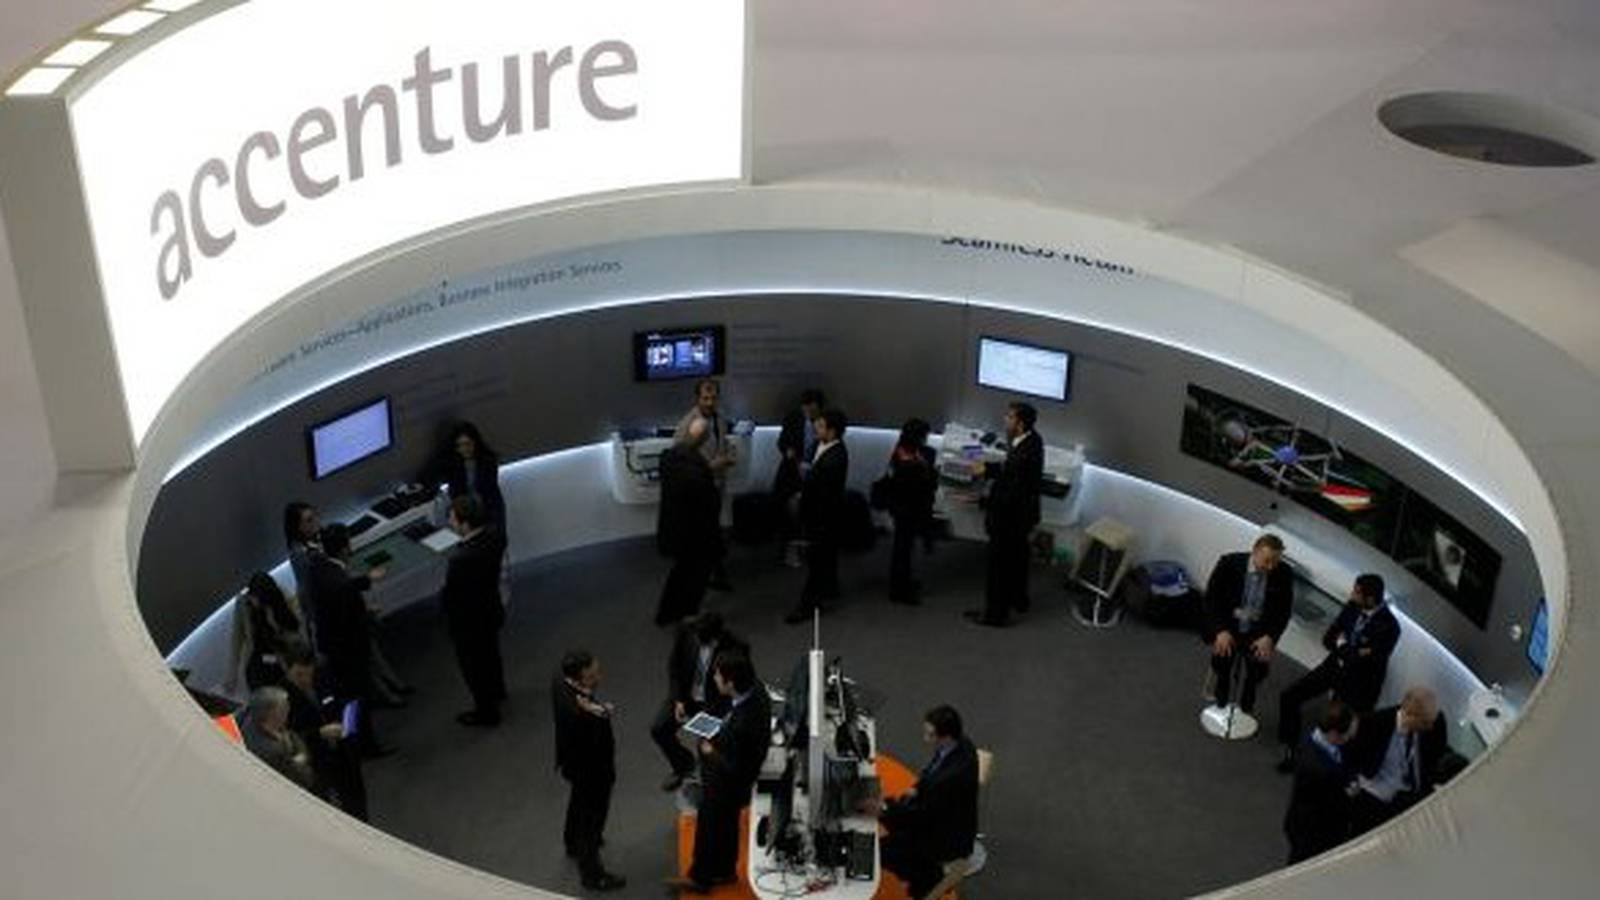 Accenture’s net up on demand for digital, cloud services The